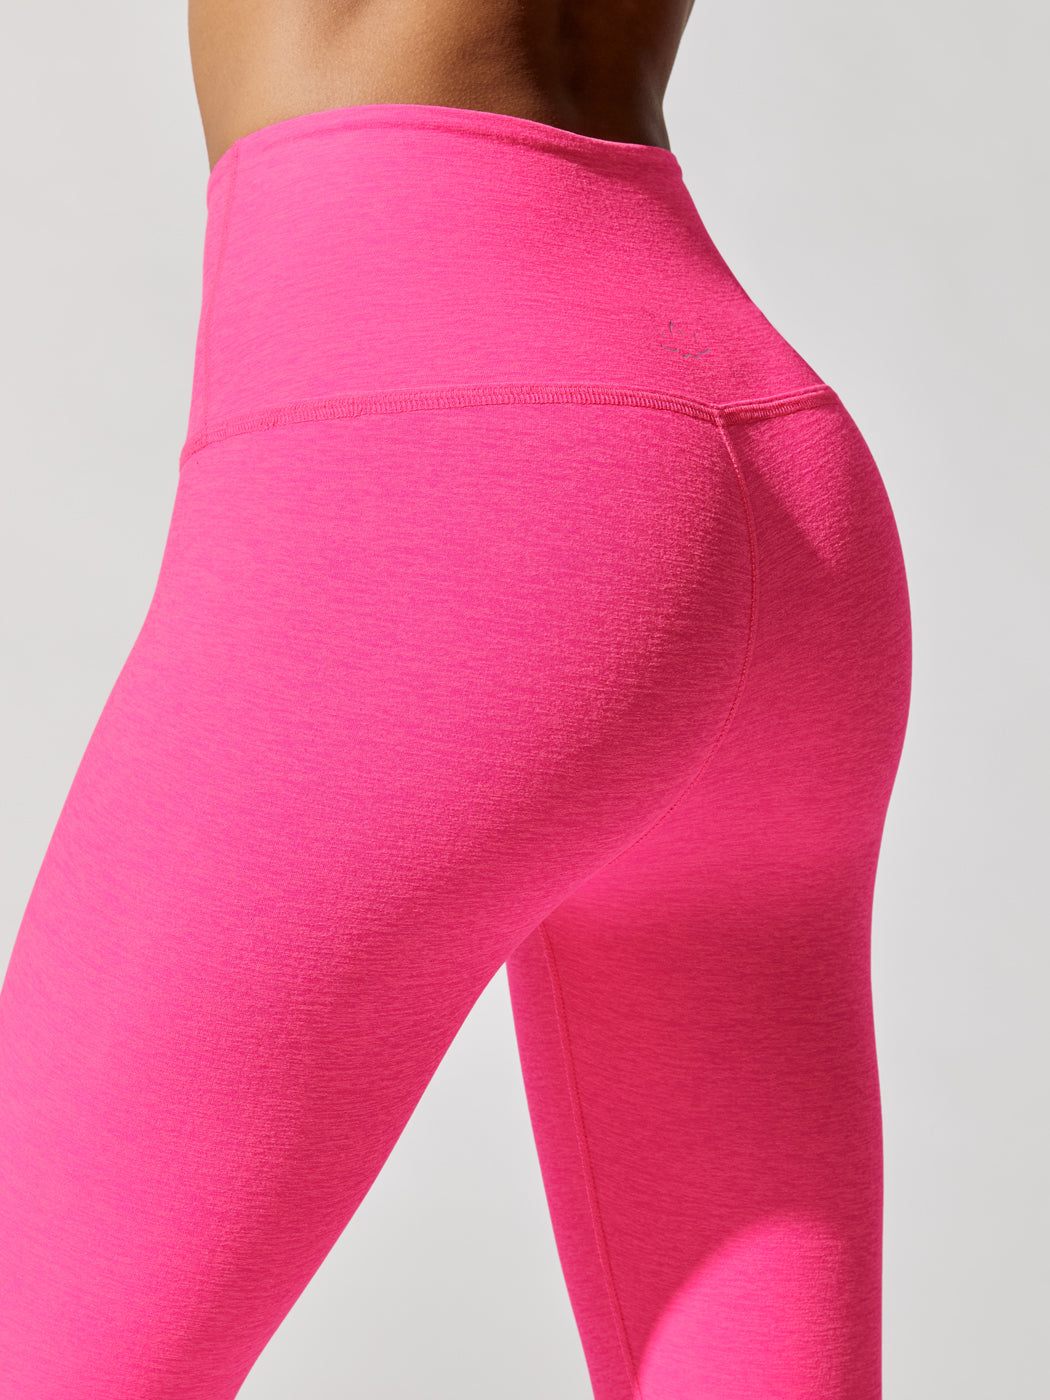 Spacedye Caught in the Midi High Waisted Legging - Electric Pink